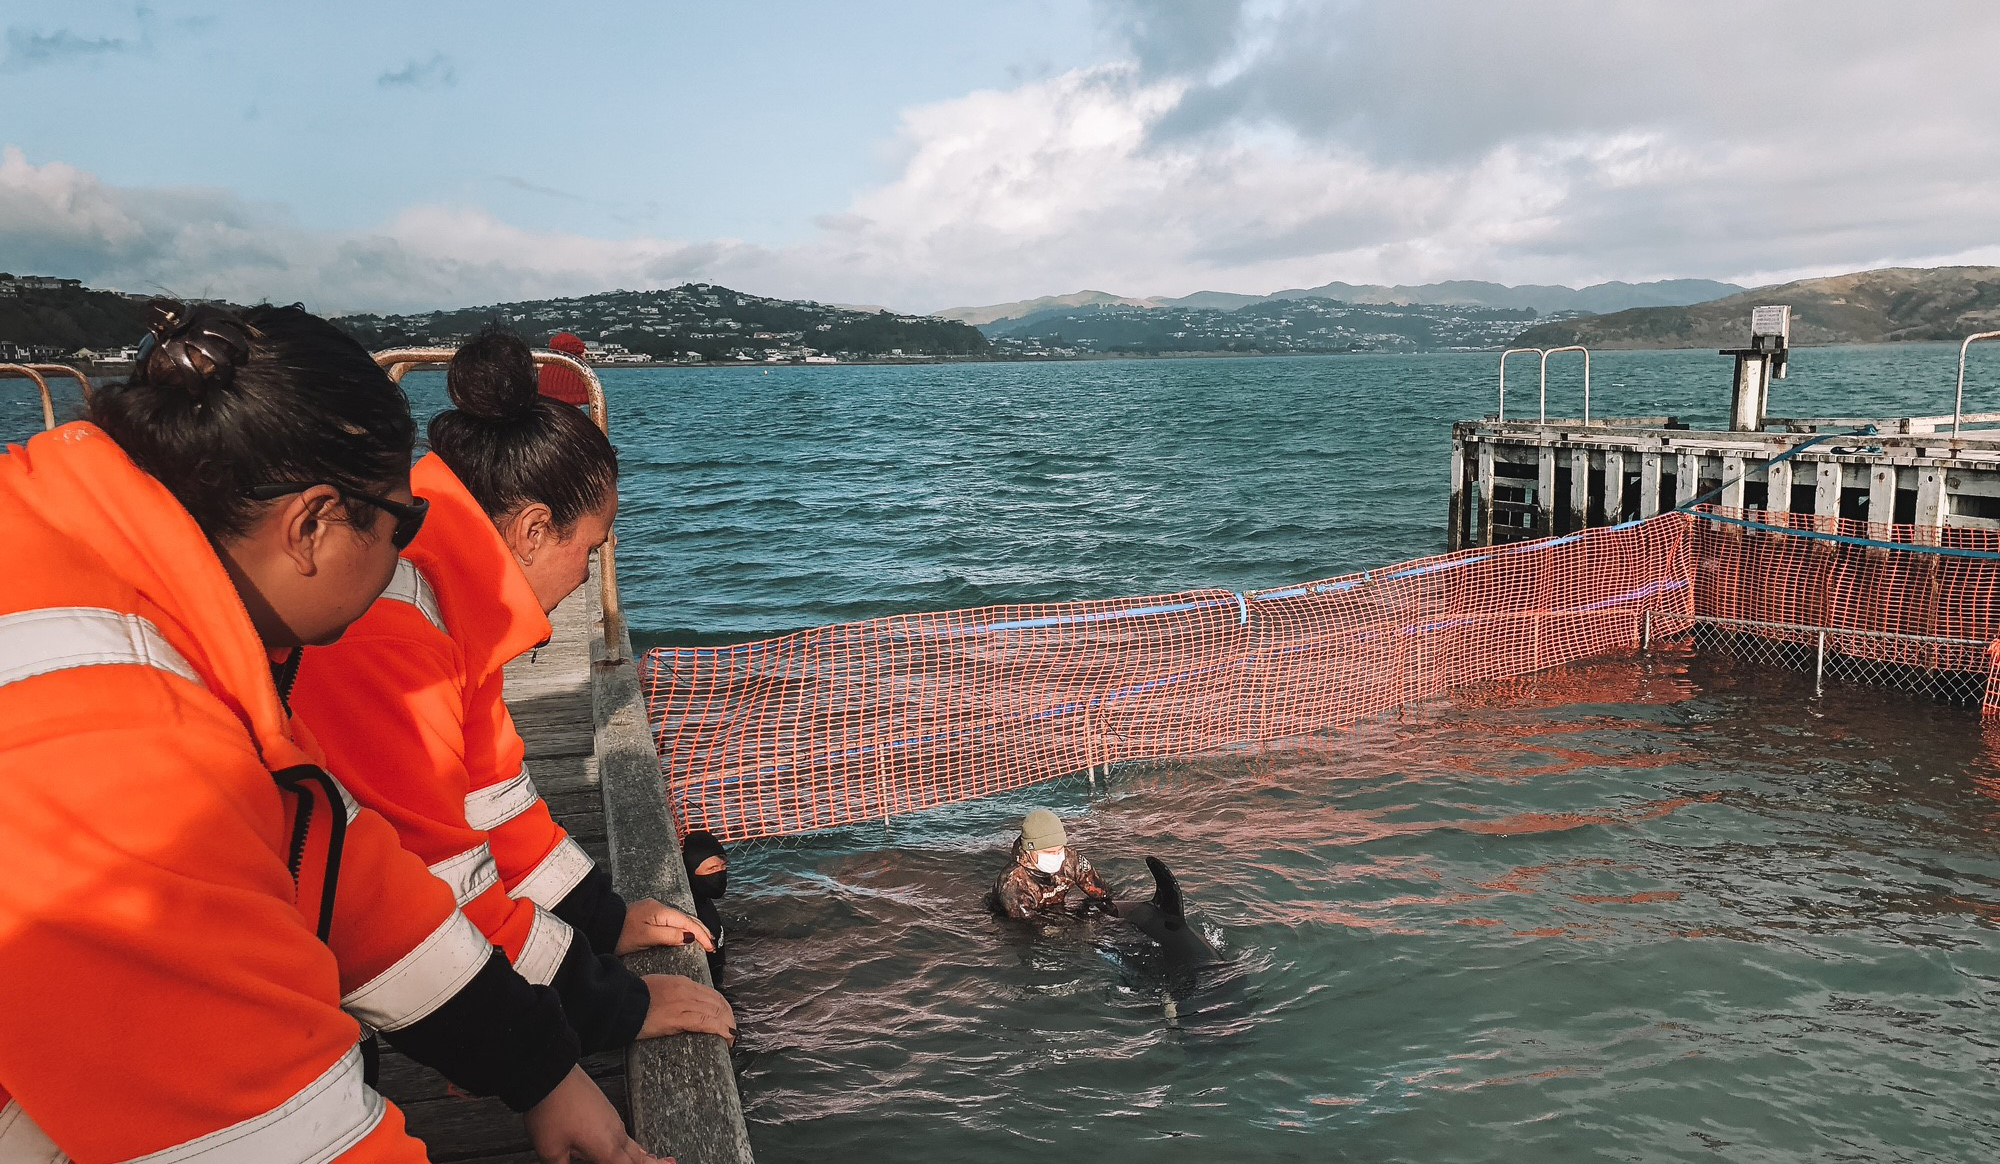 Two women in Hi Vis jackets looking into pen where orca whale, Toa, is swimming